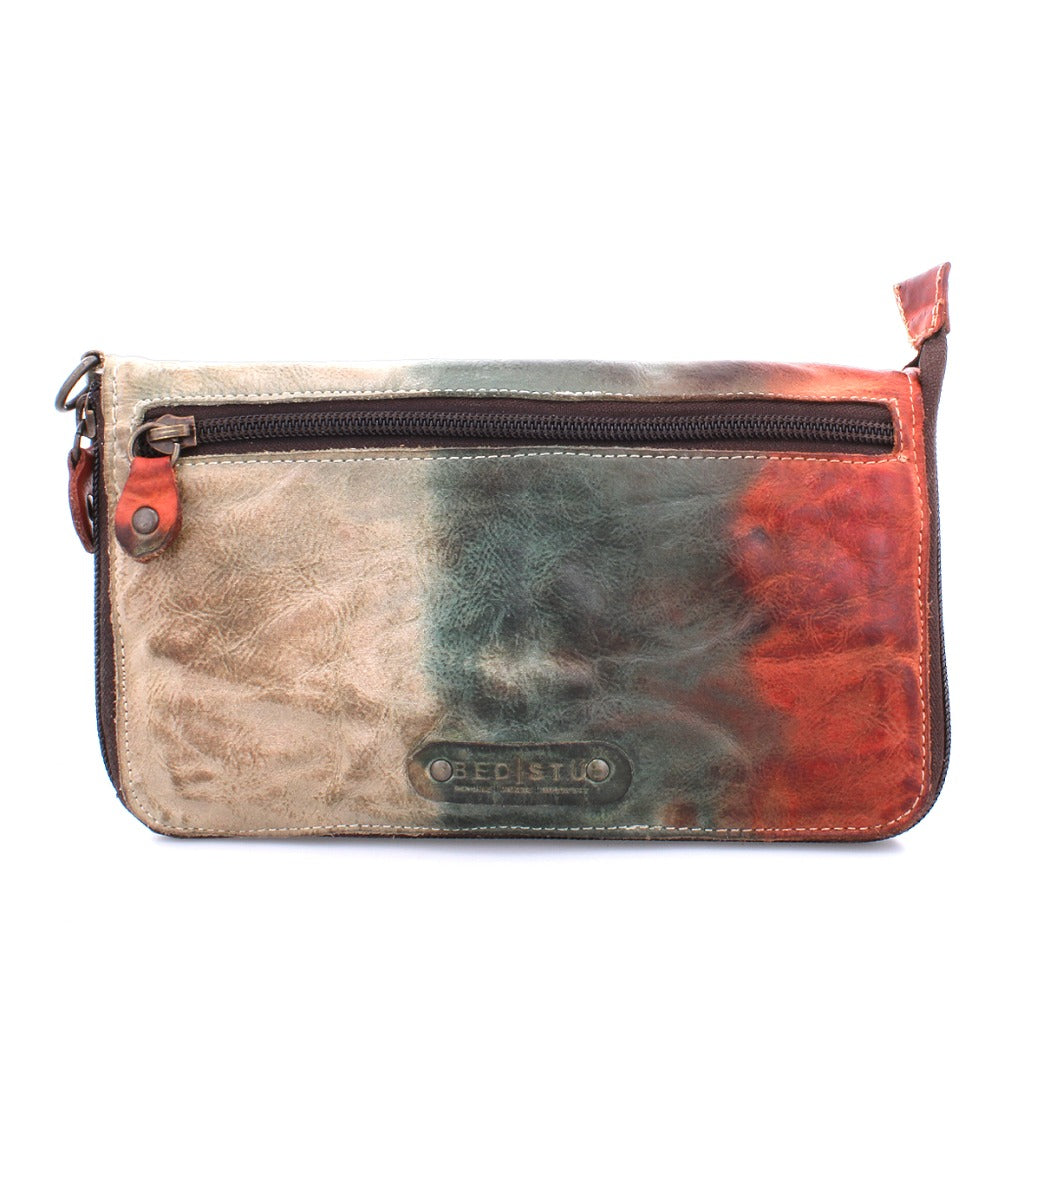 Bed Stu Templeton II colorful leather multi-functional pure leather clutch with zippered compartment.